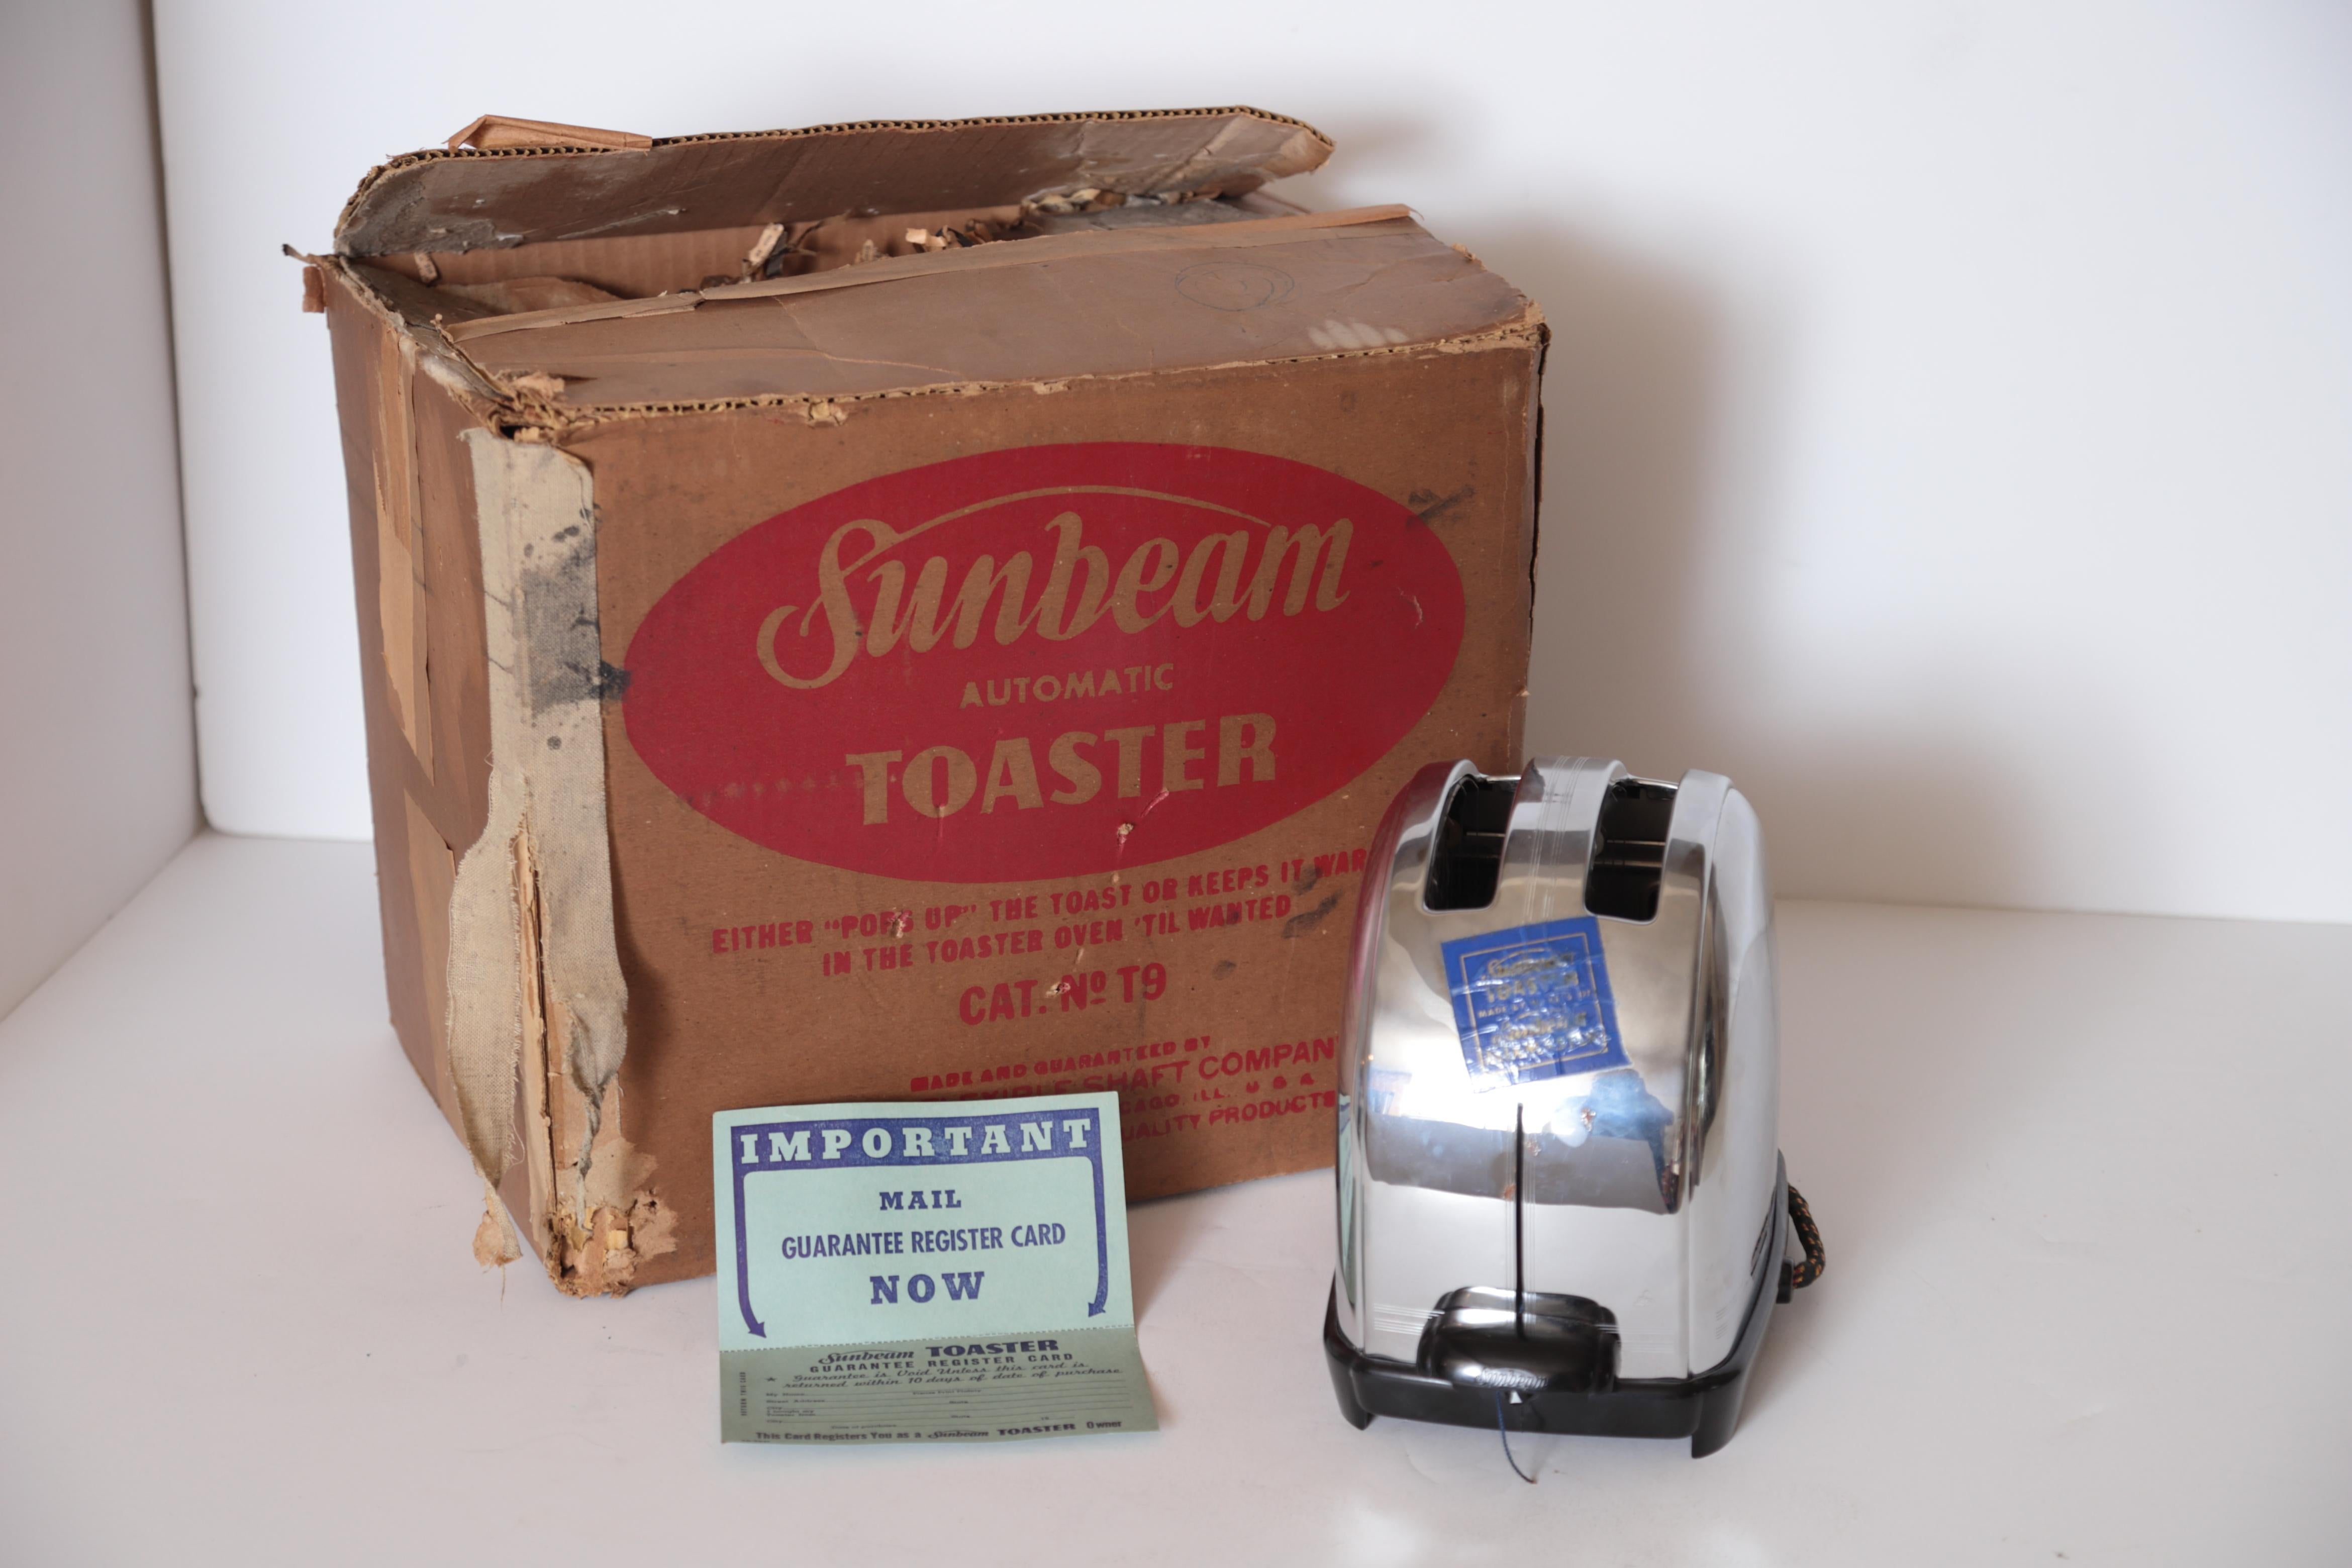 Art Deco Machine Age iconic patented sunbeam T-9 toaster, mint original display model, Museum quality unused

Another of the original Classic American Industrial modernist re-designs of utilitarian objects for every-man. Allegedly Sunbeam's most